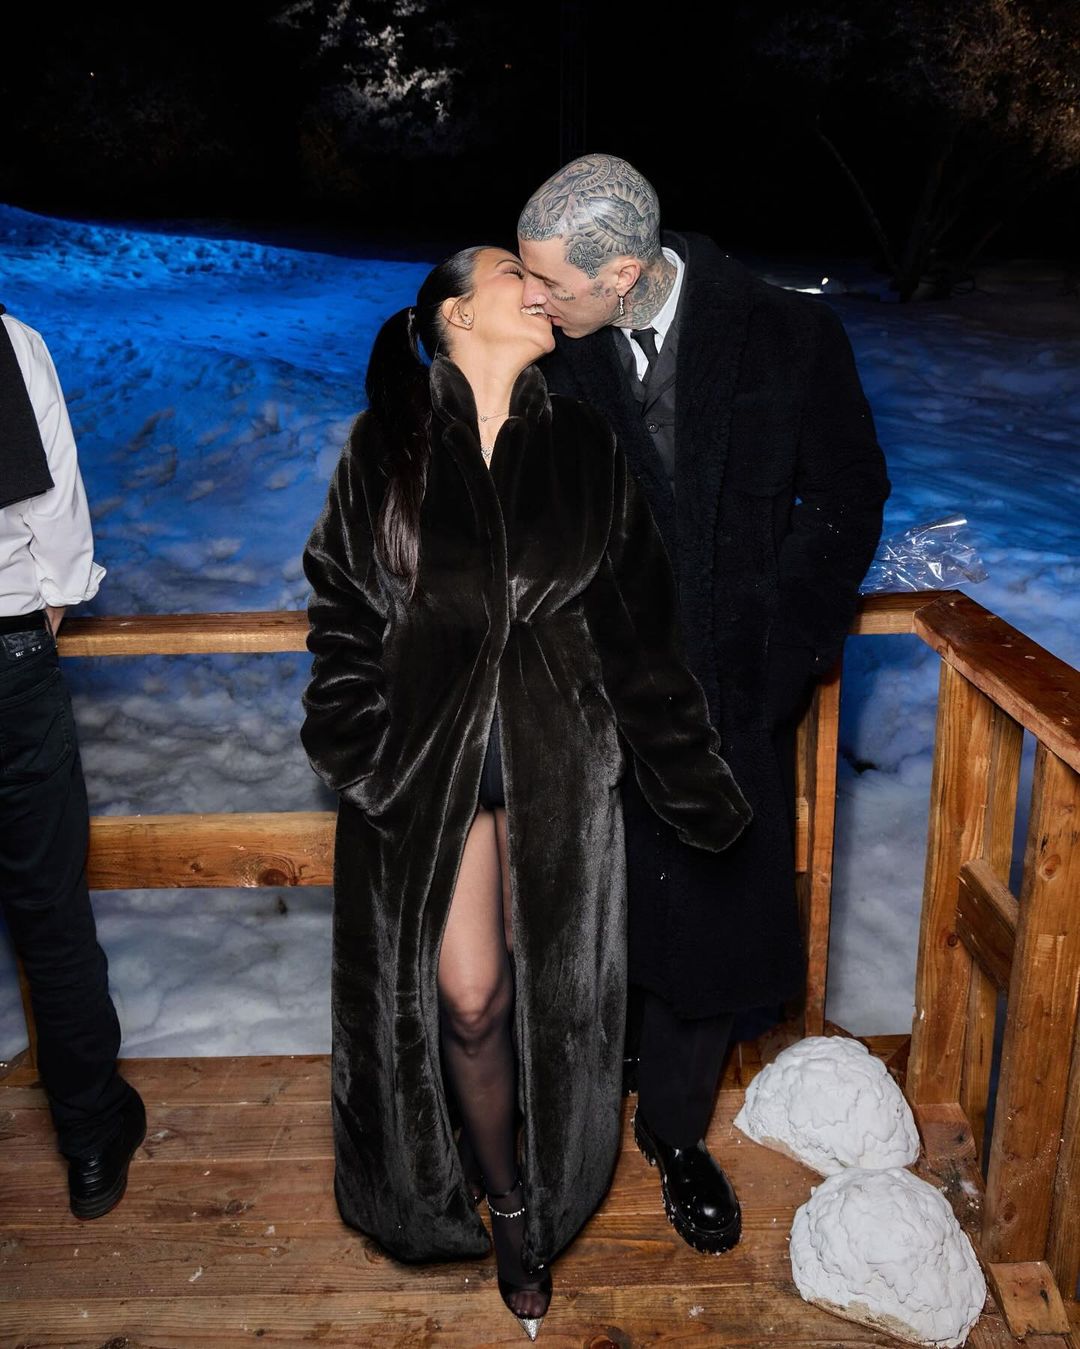 Photos taken at the holiday party captured Kourtney flaunting her impressive figure